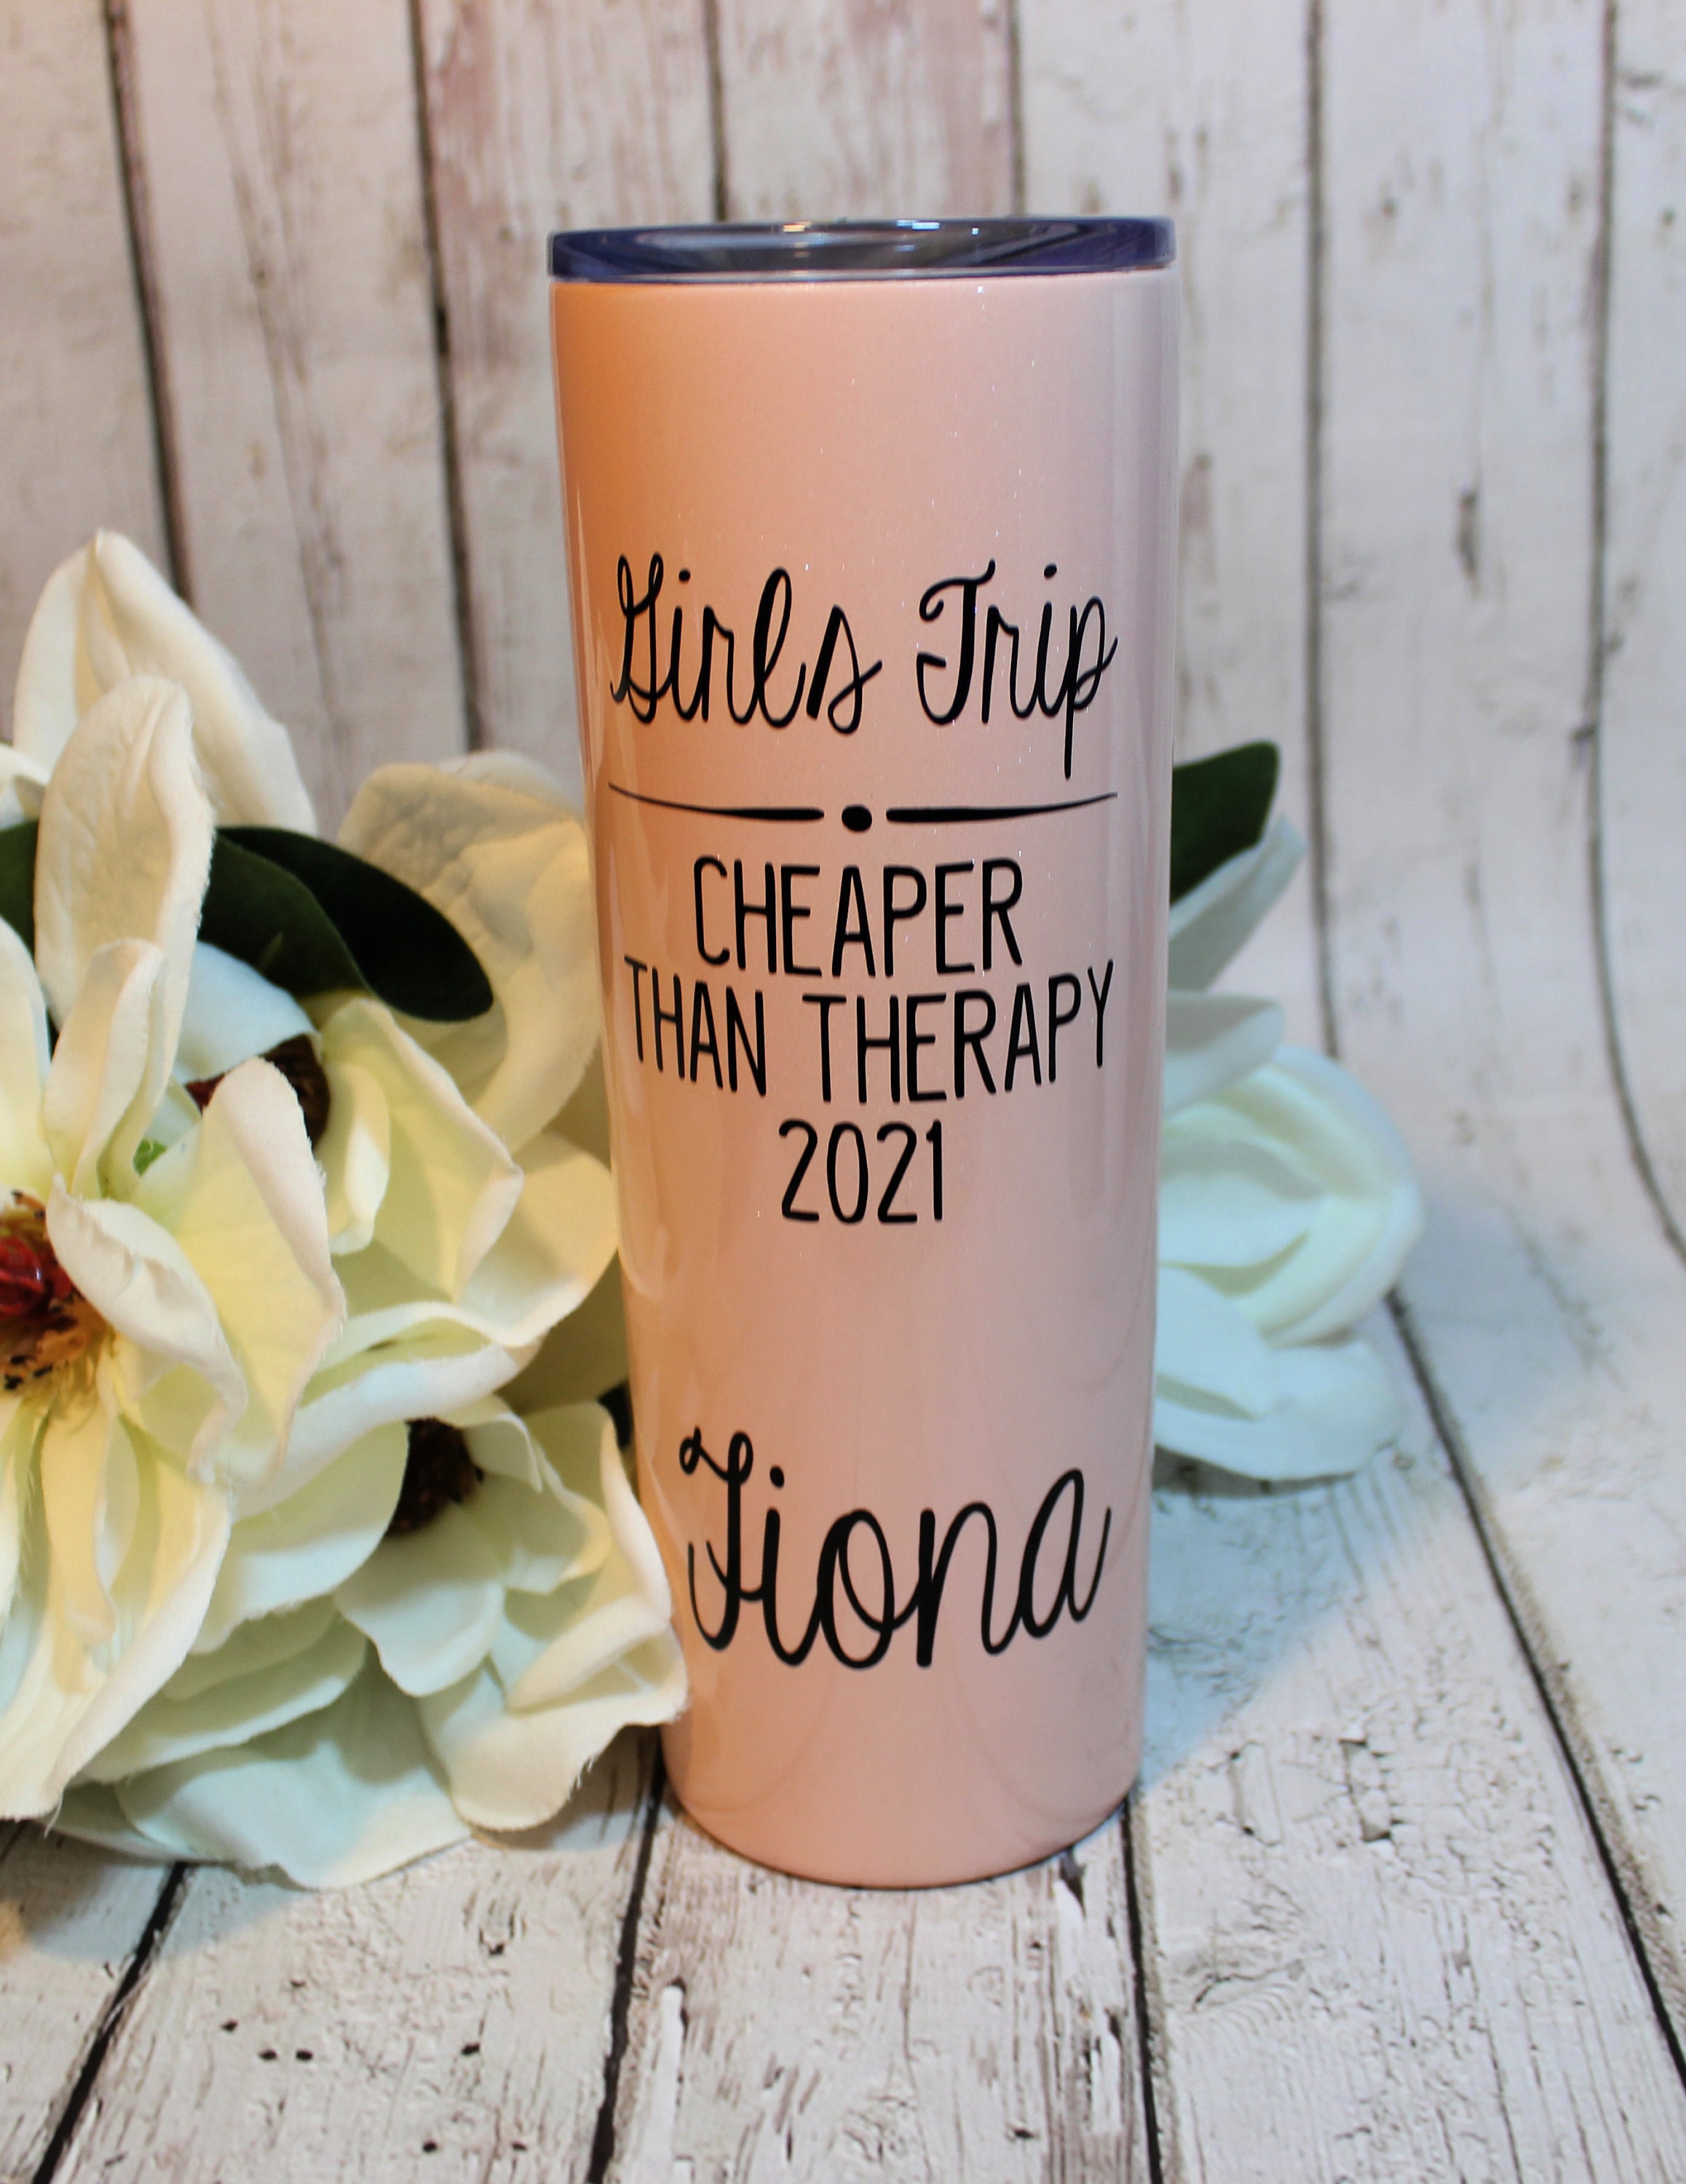 Girls Trip is Cheaper than Therapy- 12 oz Powder Coated Etched